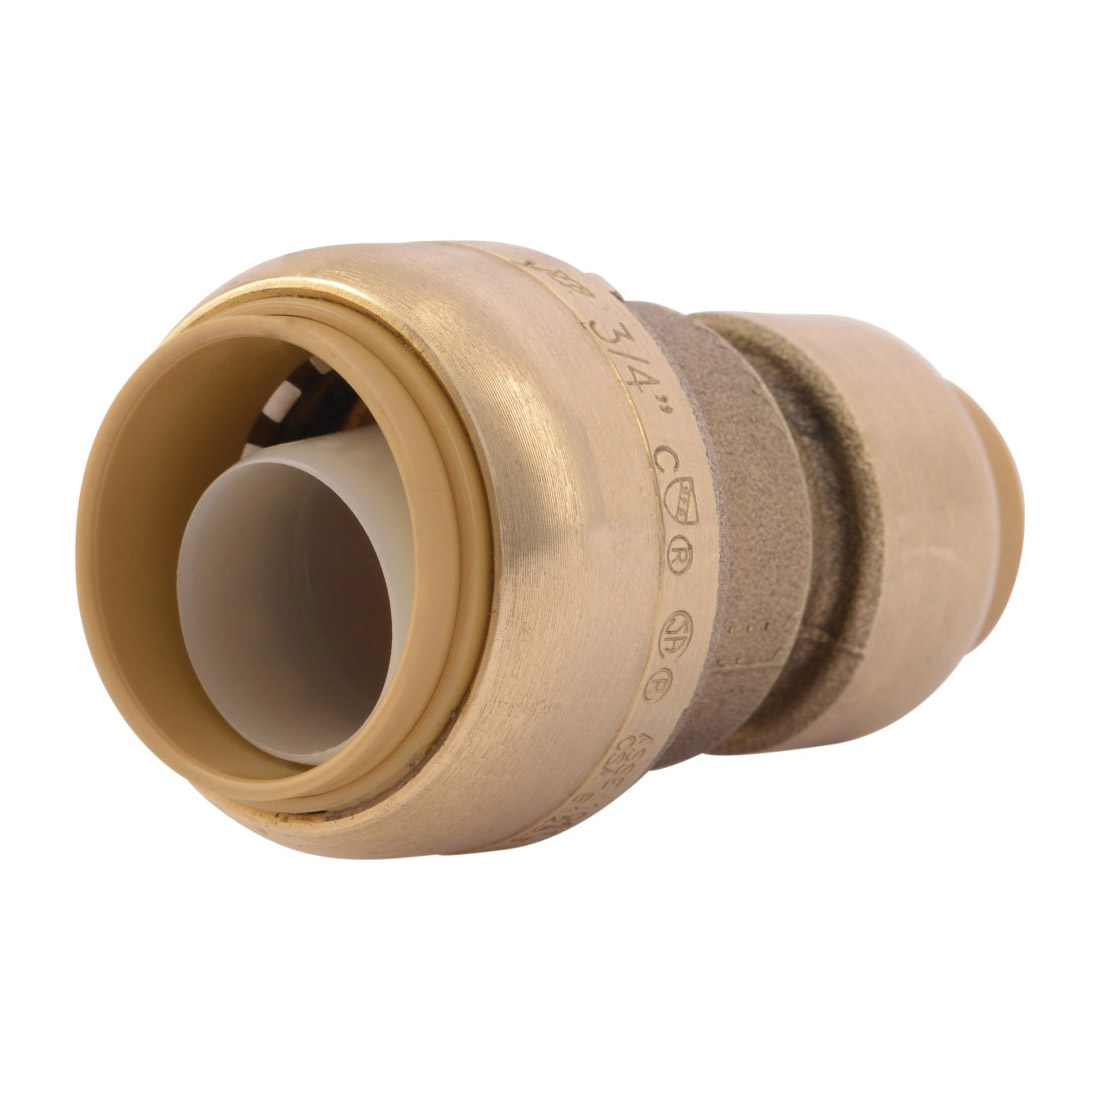 Sharkbite® U058LF Pipe Reducing Coupling, 3/4 x 1/2 in Nominal, Push-Fit End Style, Brass, Import